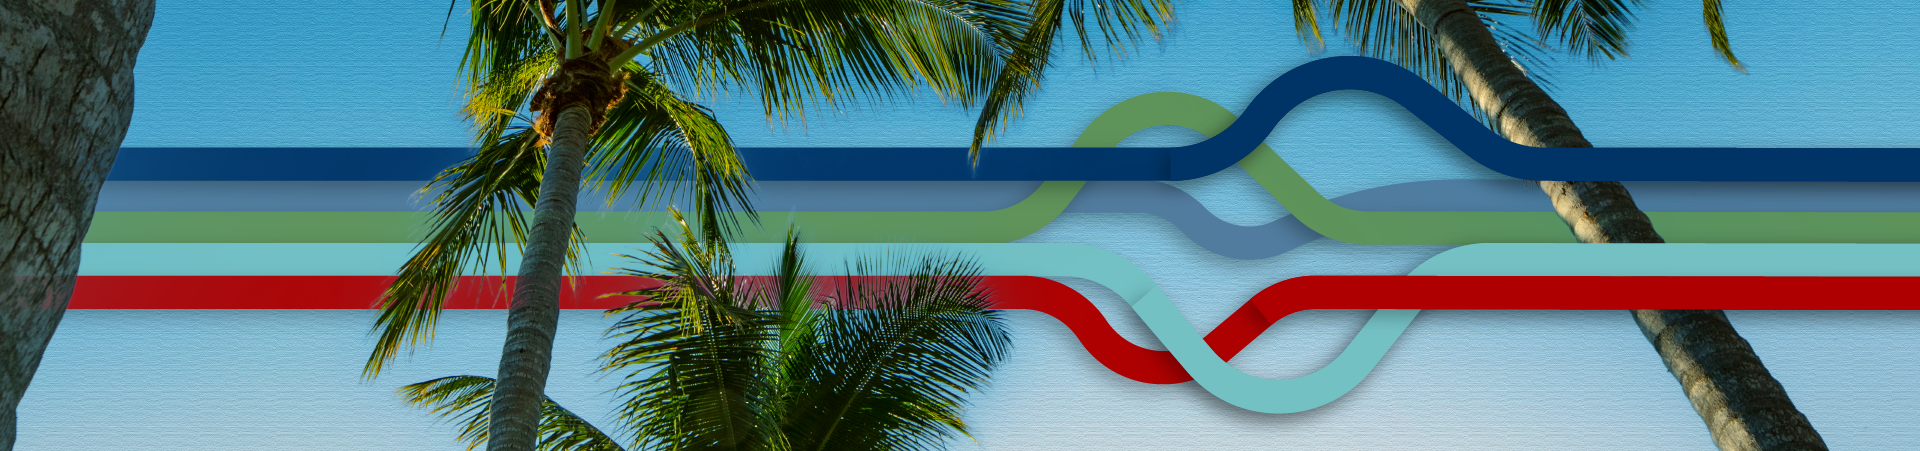 image of palm fronds with abstrct lines in red and blue